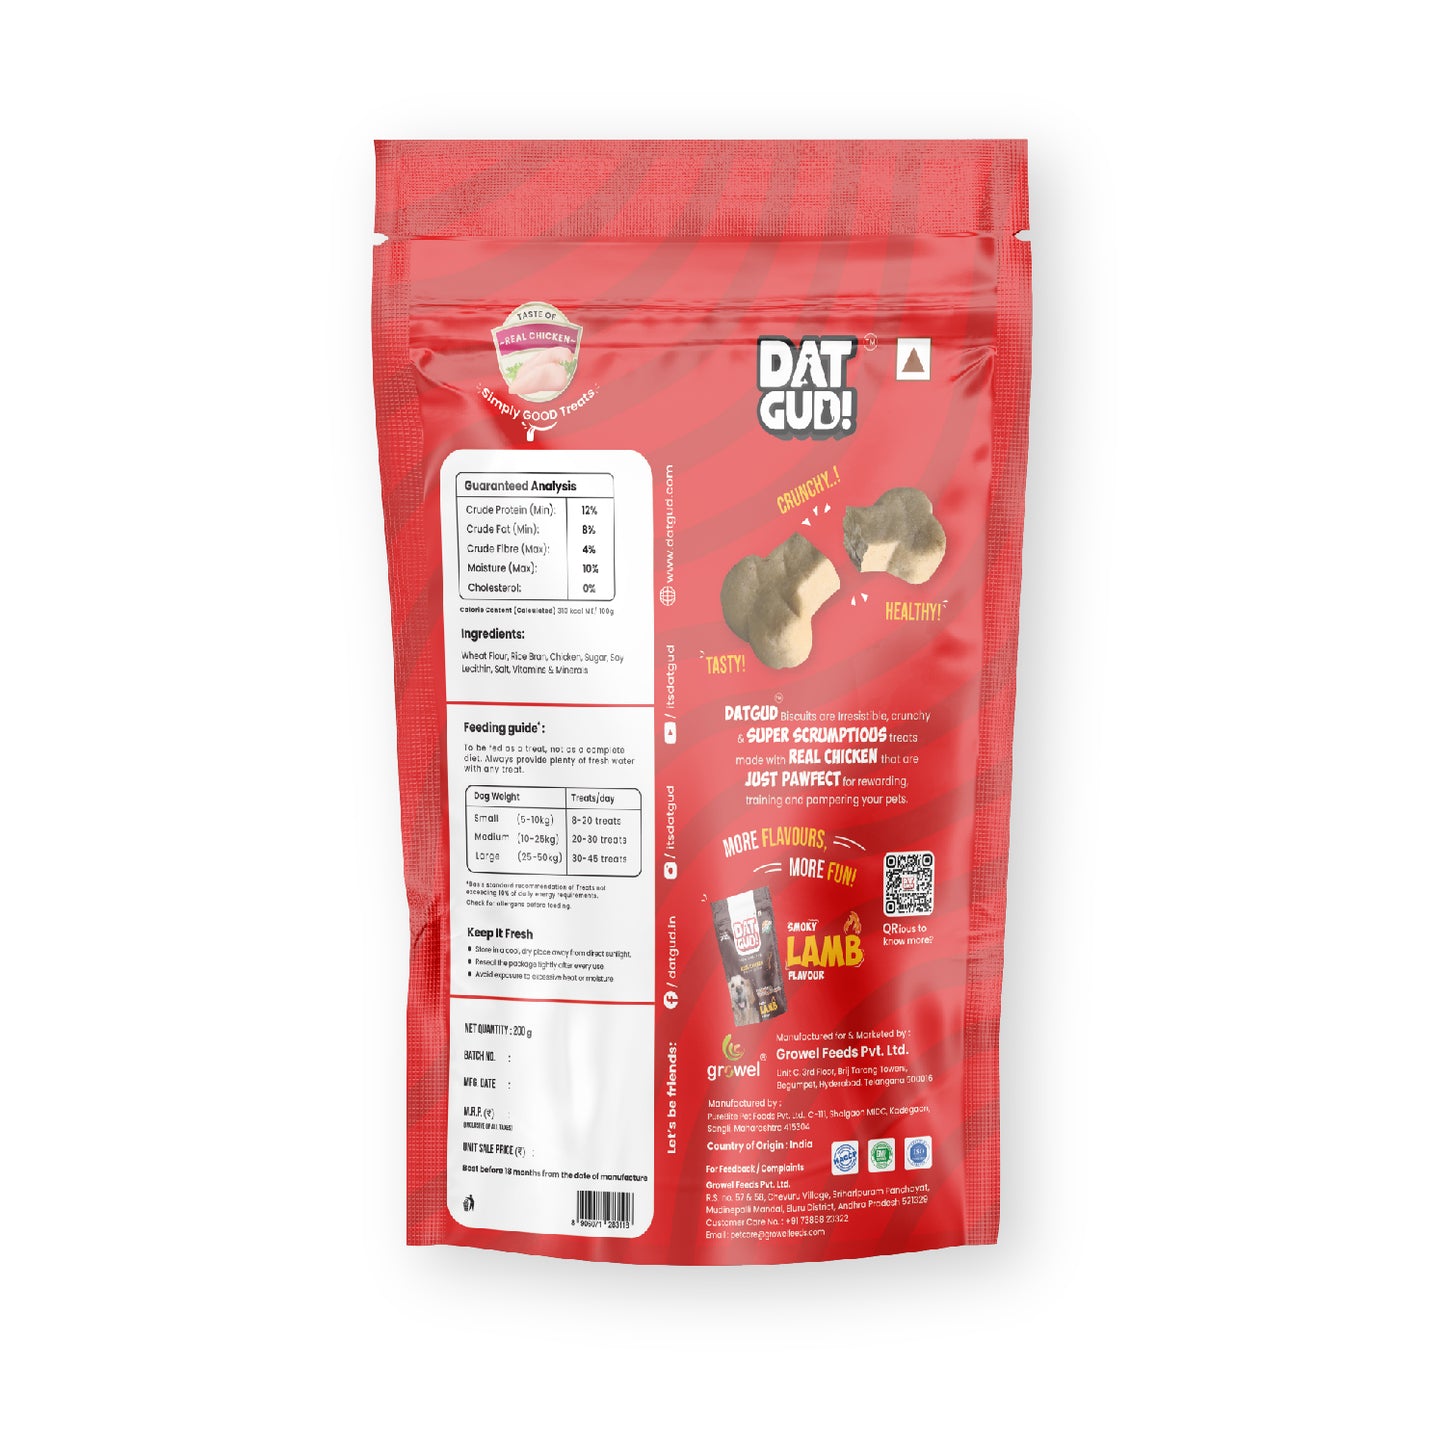 Packshot of DatGud Real chicken biscuits showing manufacturing details, feeding guide, ingredients and nutrition analysis.    Nutrition Analysis:  Crude Protein (Min): 12% Crude Fat (Min): 8% Crude Fiber (Max): 4% Moisture (Max): 10%  Cholesterol: 0% Calorie content caluculated: 310 kcal ME/100 gm.